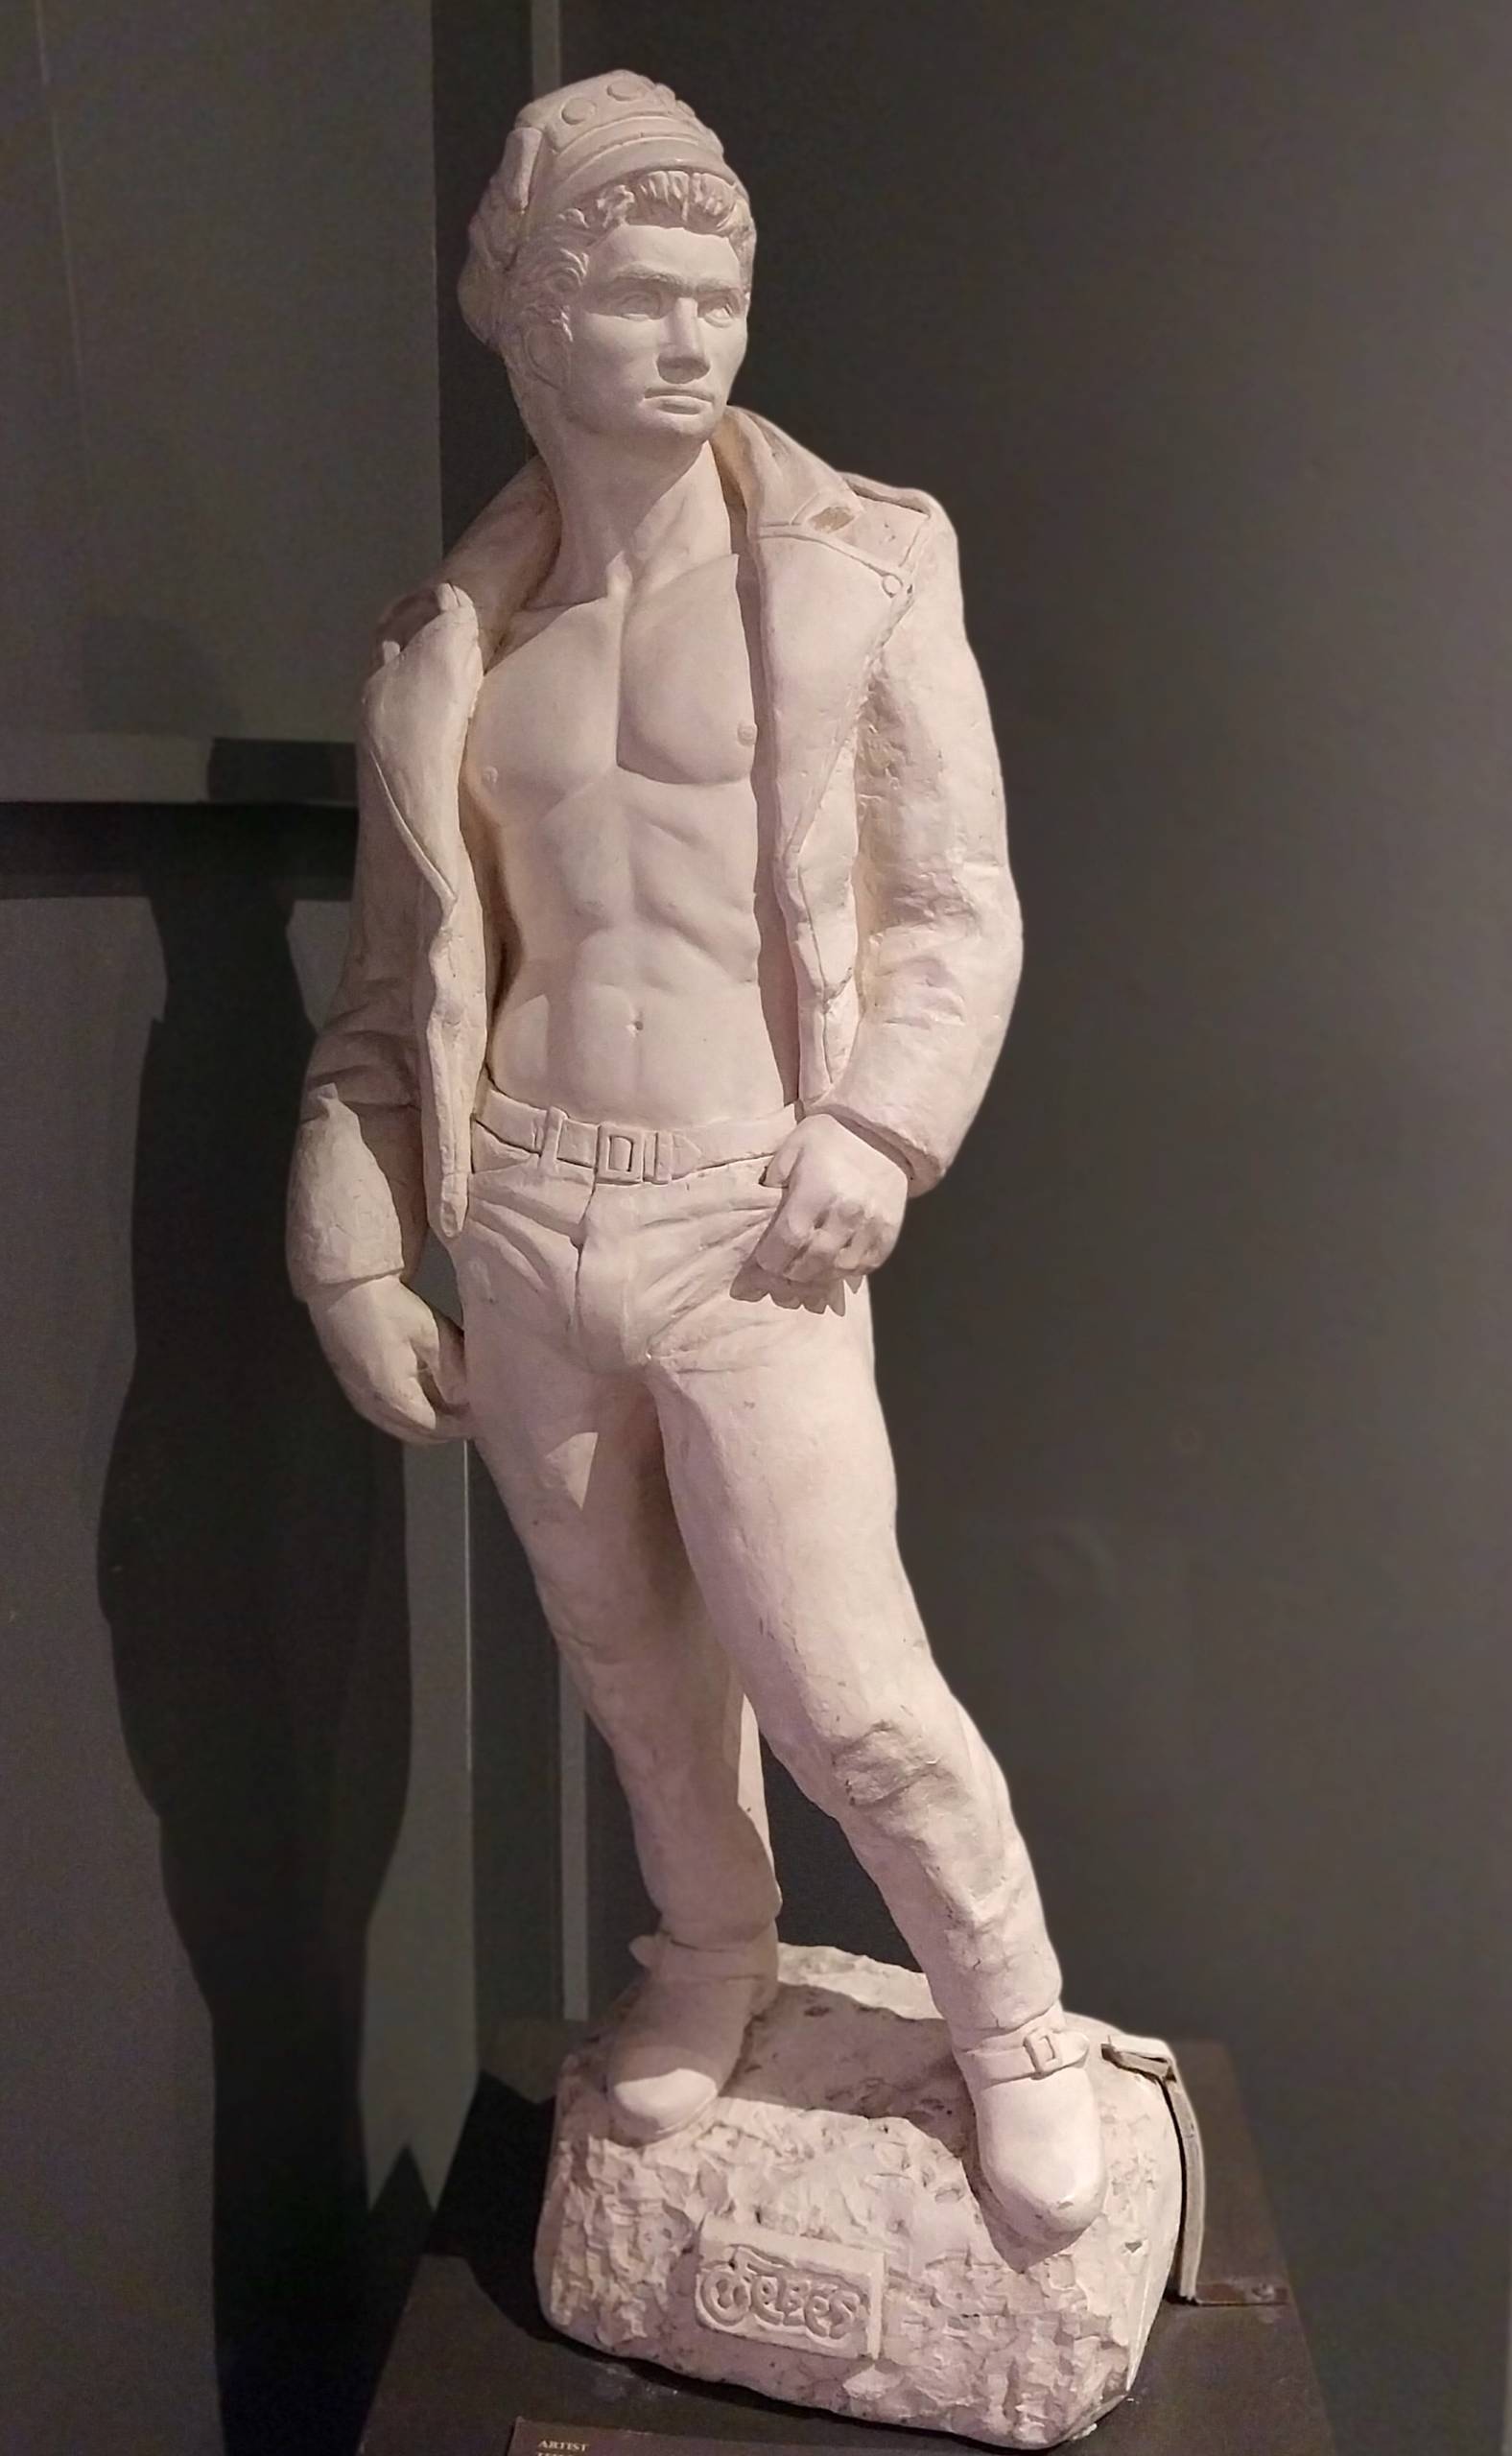 A white marble statue depicting a shirtless biker, with his hand hooked in one pocket.